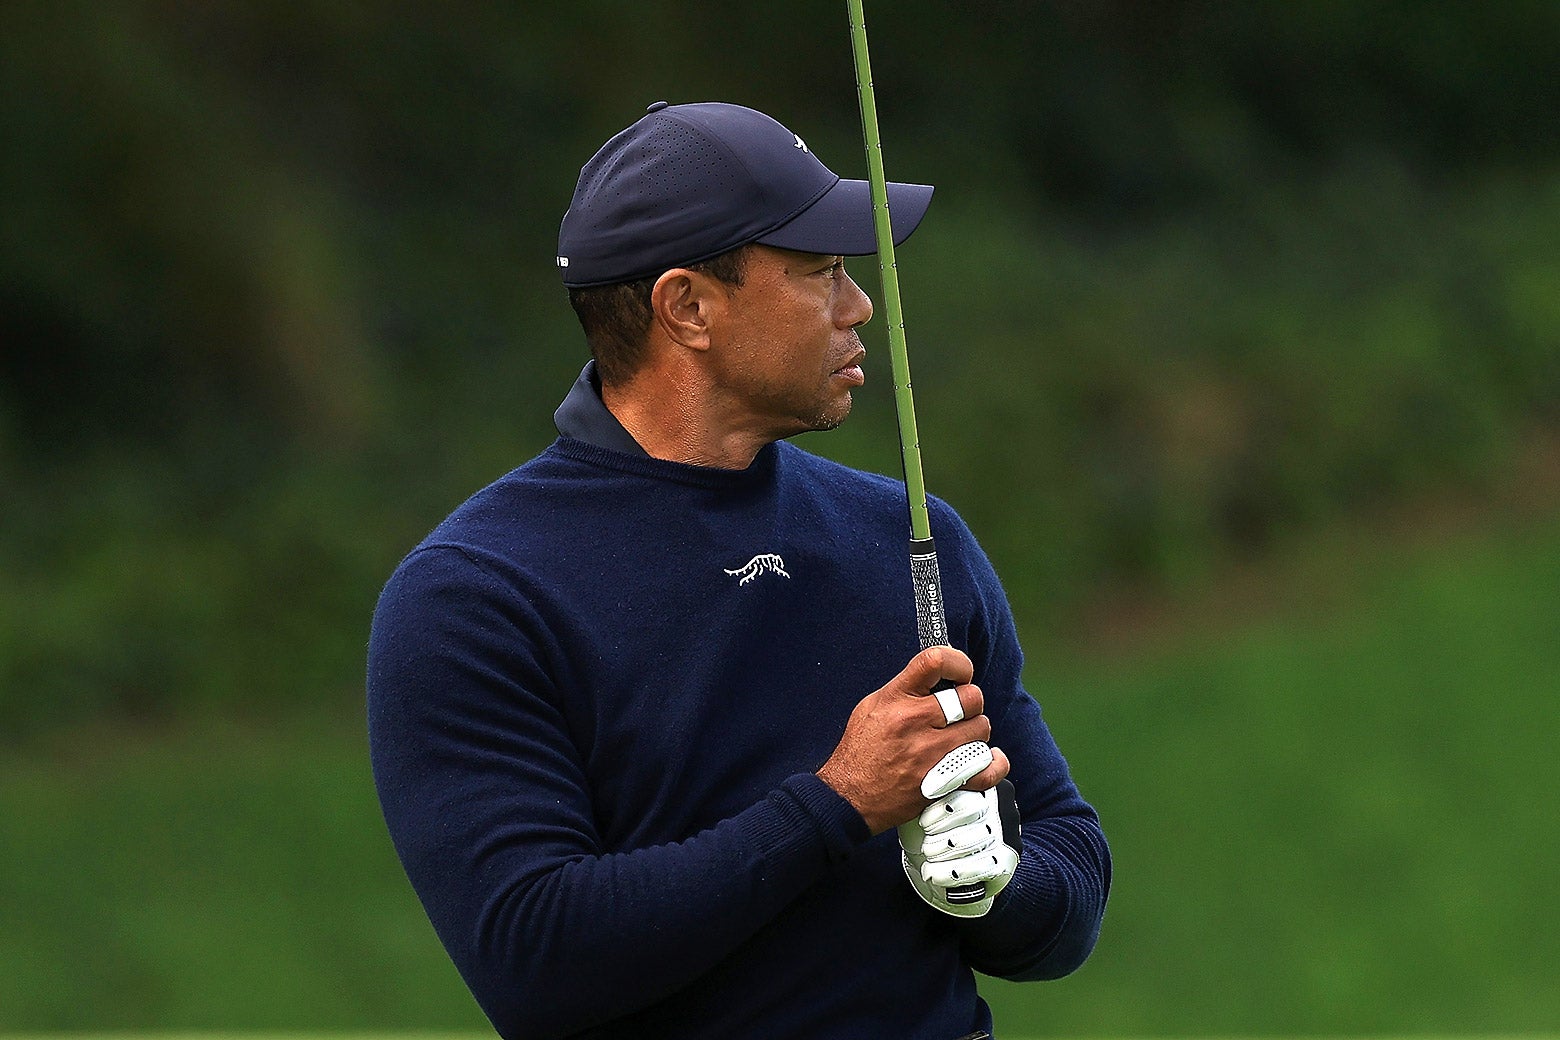 I Went to Watch Tiger Woods. I Saw a Sport Facing Down a Crisis. Alex Kirshner